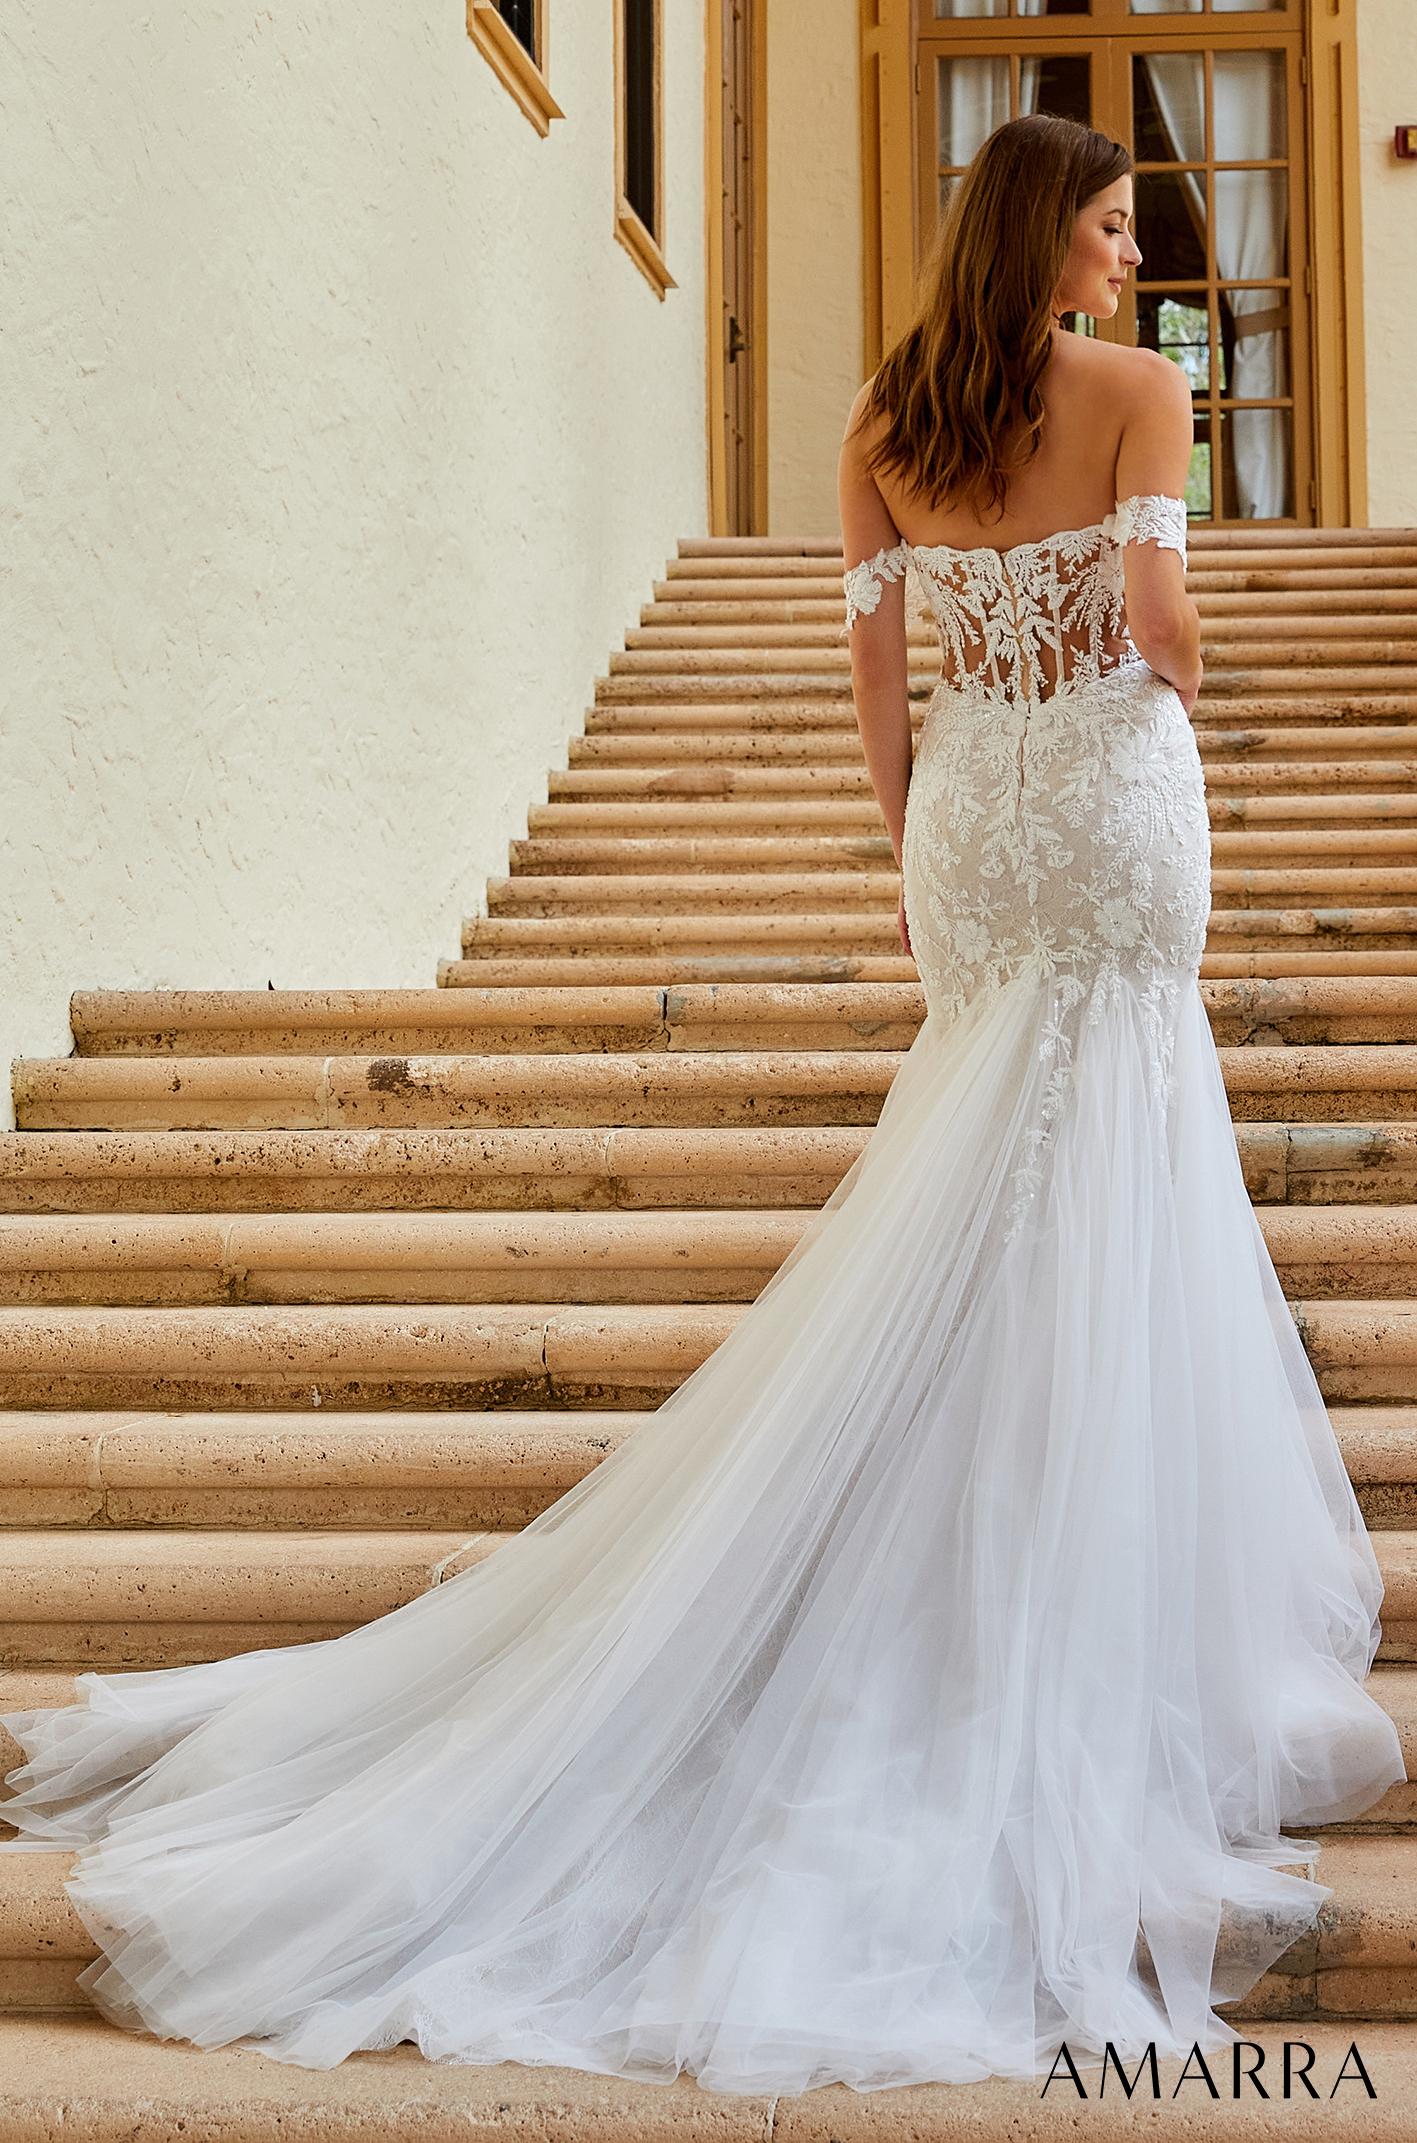 Dramatic v-neck tulle wedding gown with beaded lace detail